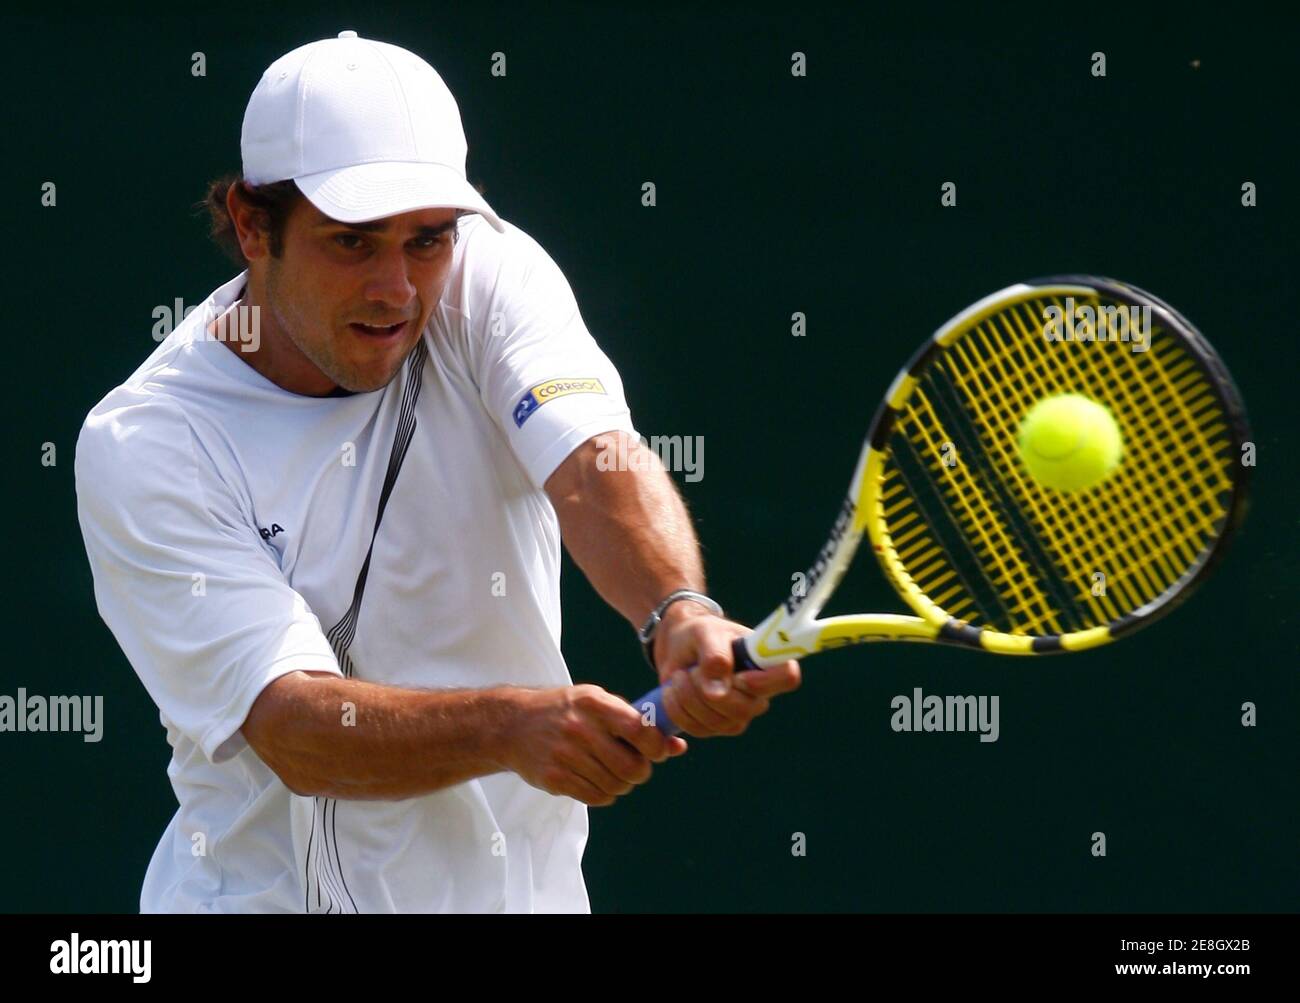 Thiago Alves of Brazil returns the ball to Gilles Simon of France during  their match at the Wimbledon tennis championships, in London June 25, 2009.  REUTERS/Eddie Keogh (BRITAIN SPORT TENNIS Stock Photo -